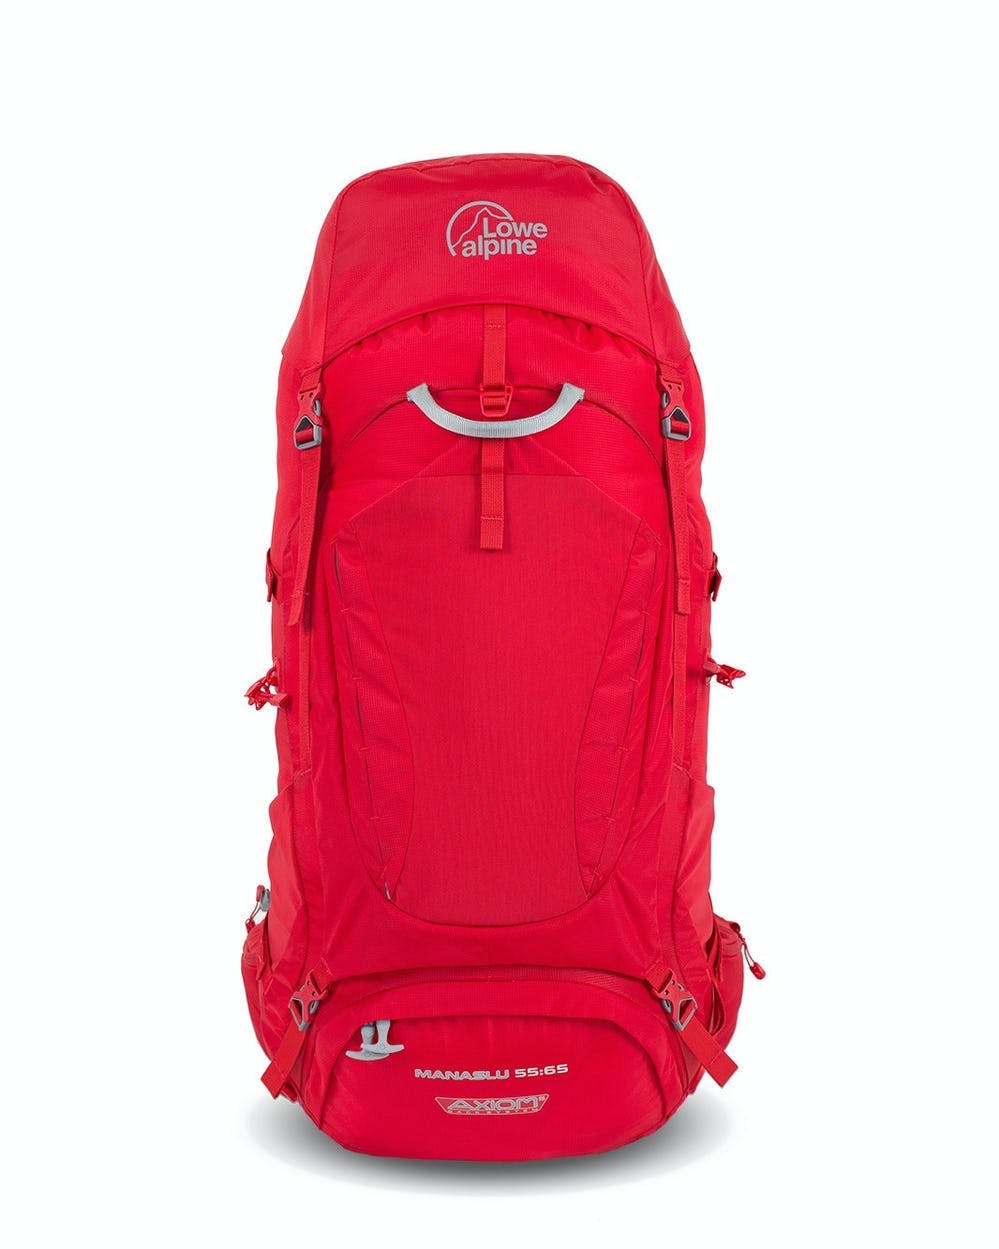 A product image of the Lowe Alpine Manaslu 55-65 Pack in Oxide.